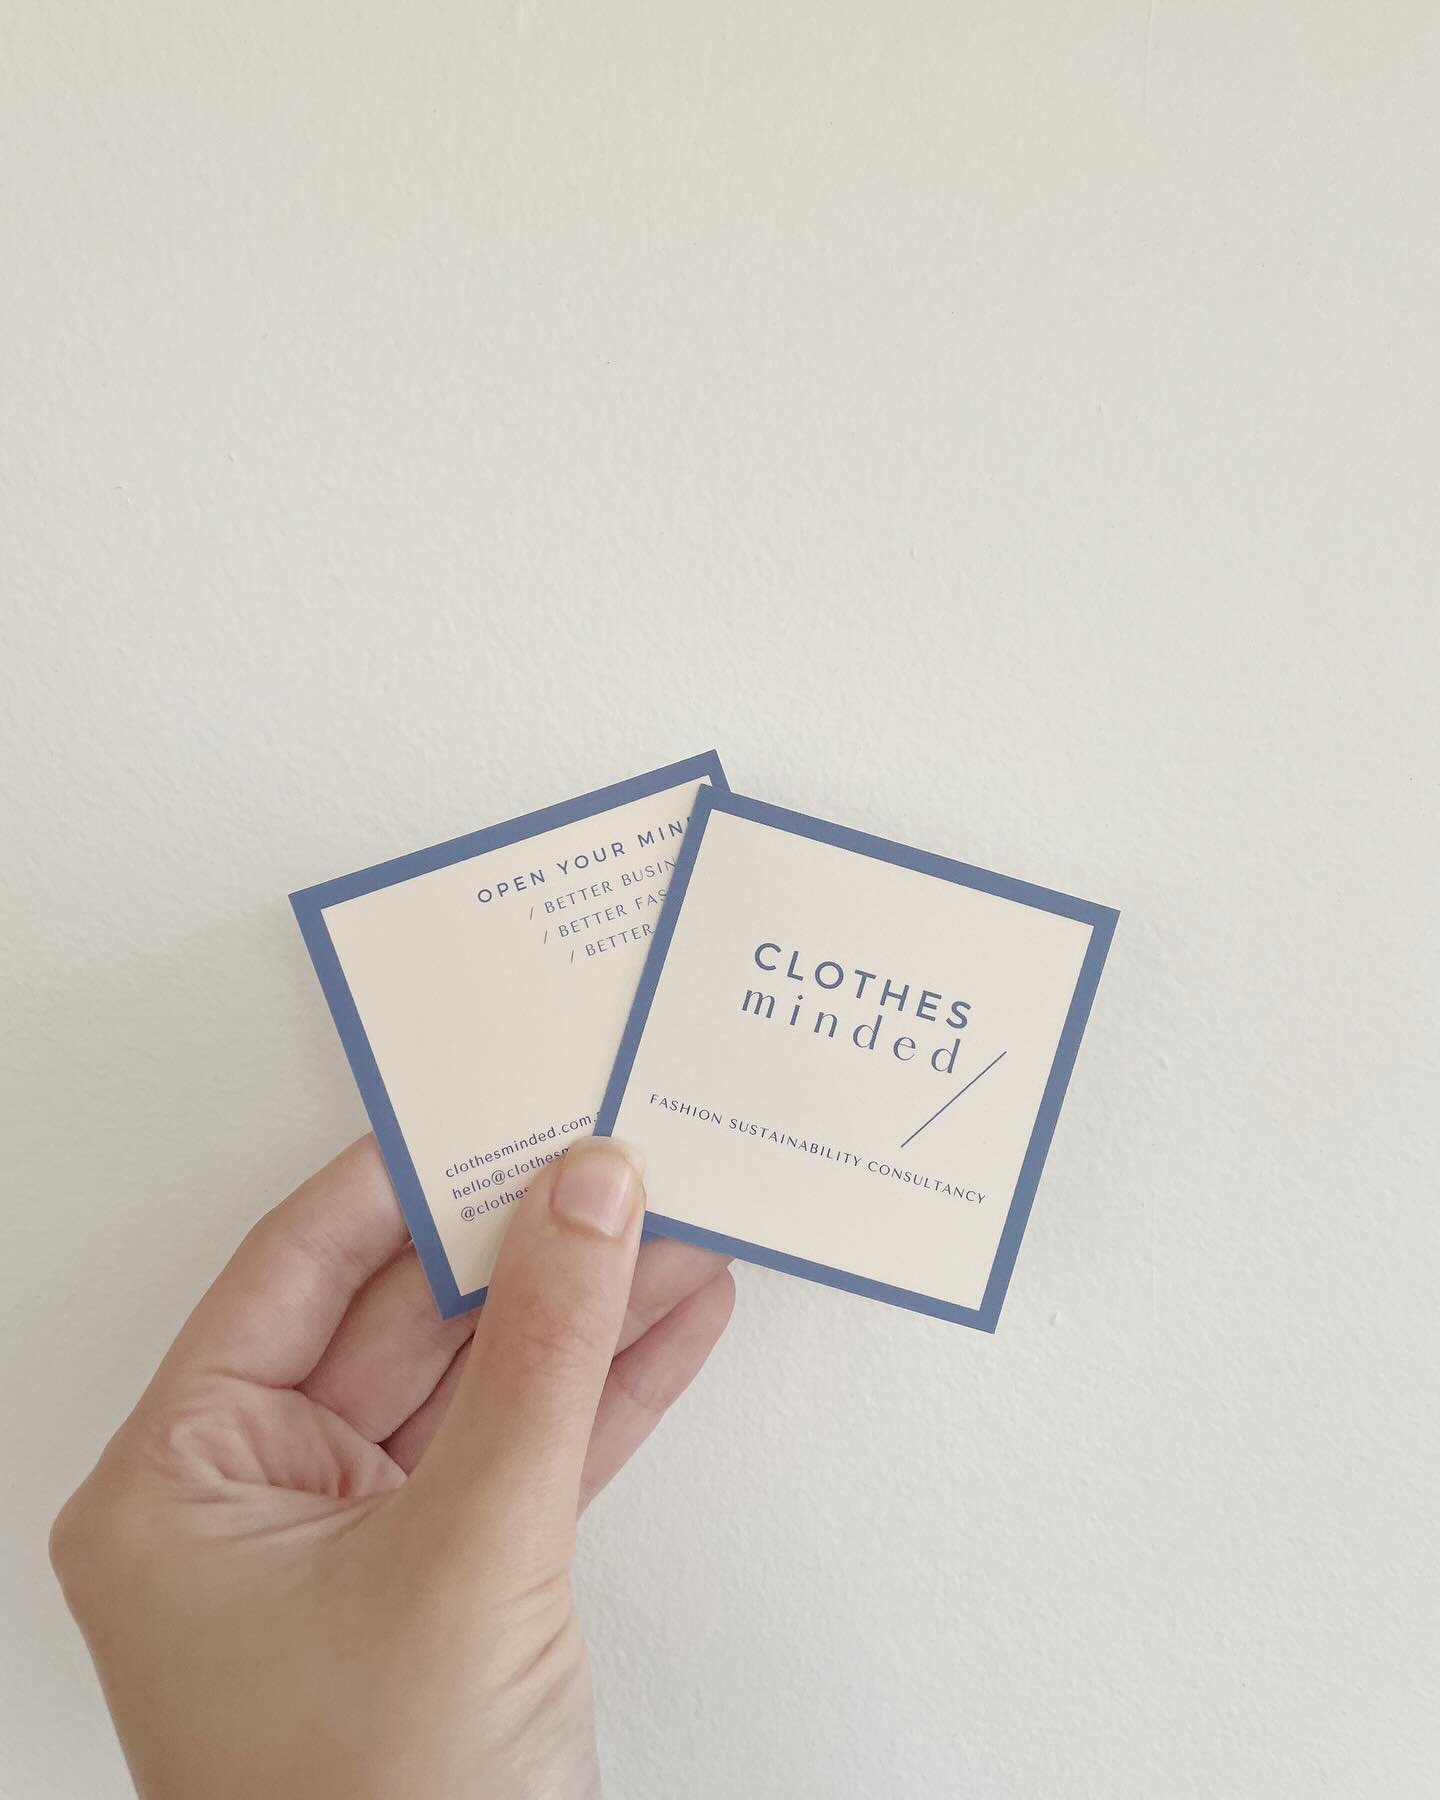 Huge welcome and thank you to some of our new followers. 
We have some exciting new plans/ideas coming soon! 
Ps how cute our business cards from @moo made from recycled cotton tshirts. 

#sustainability #sustainablefashion #ethicalsourcing #traceabi